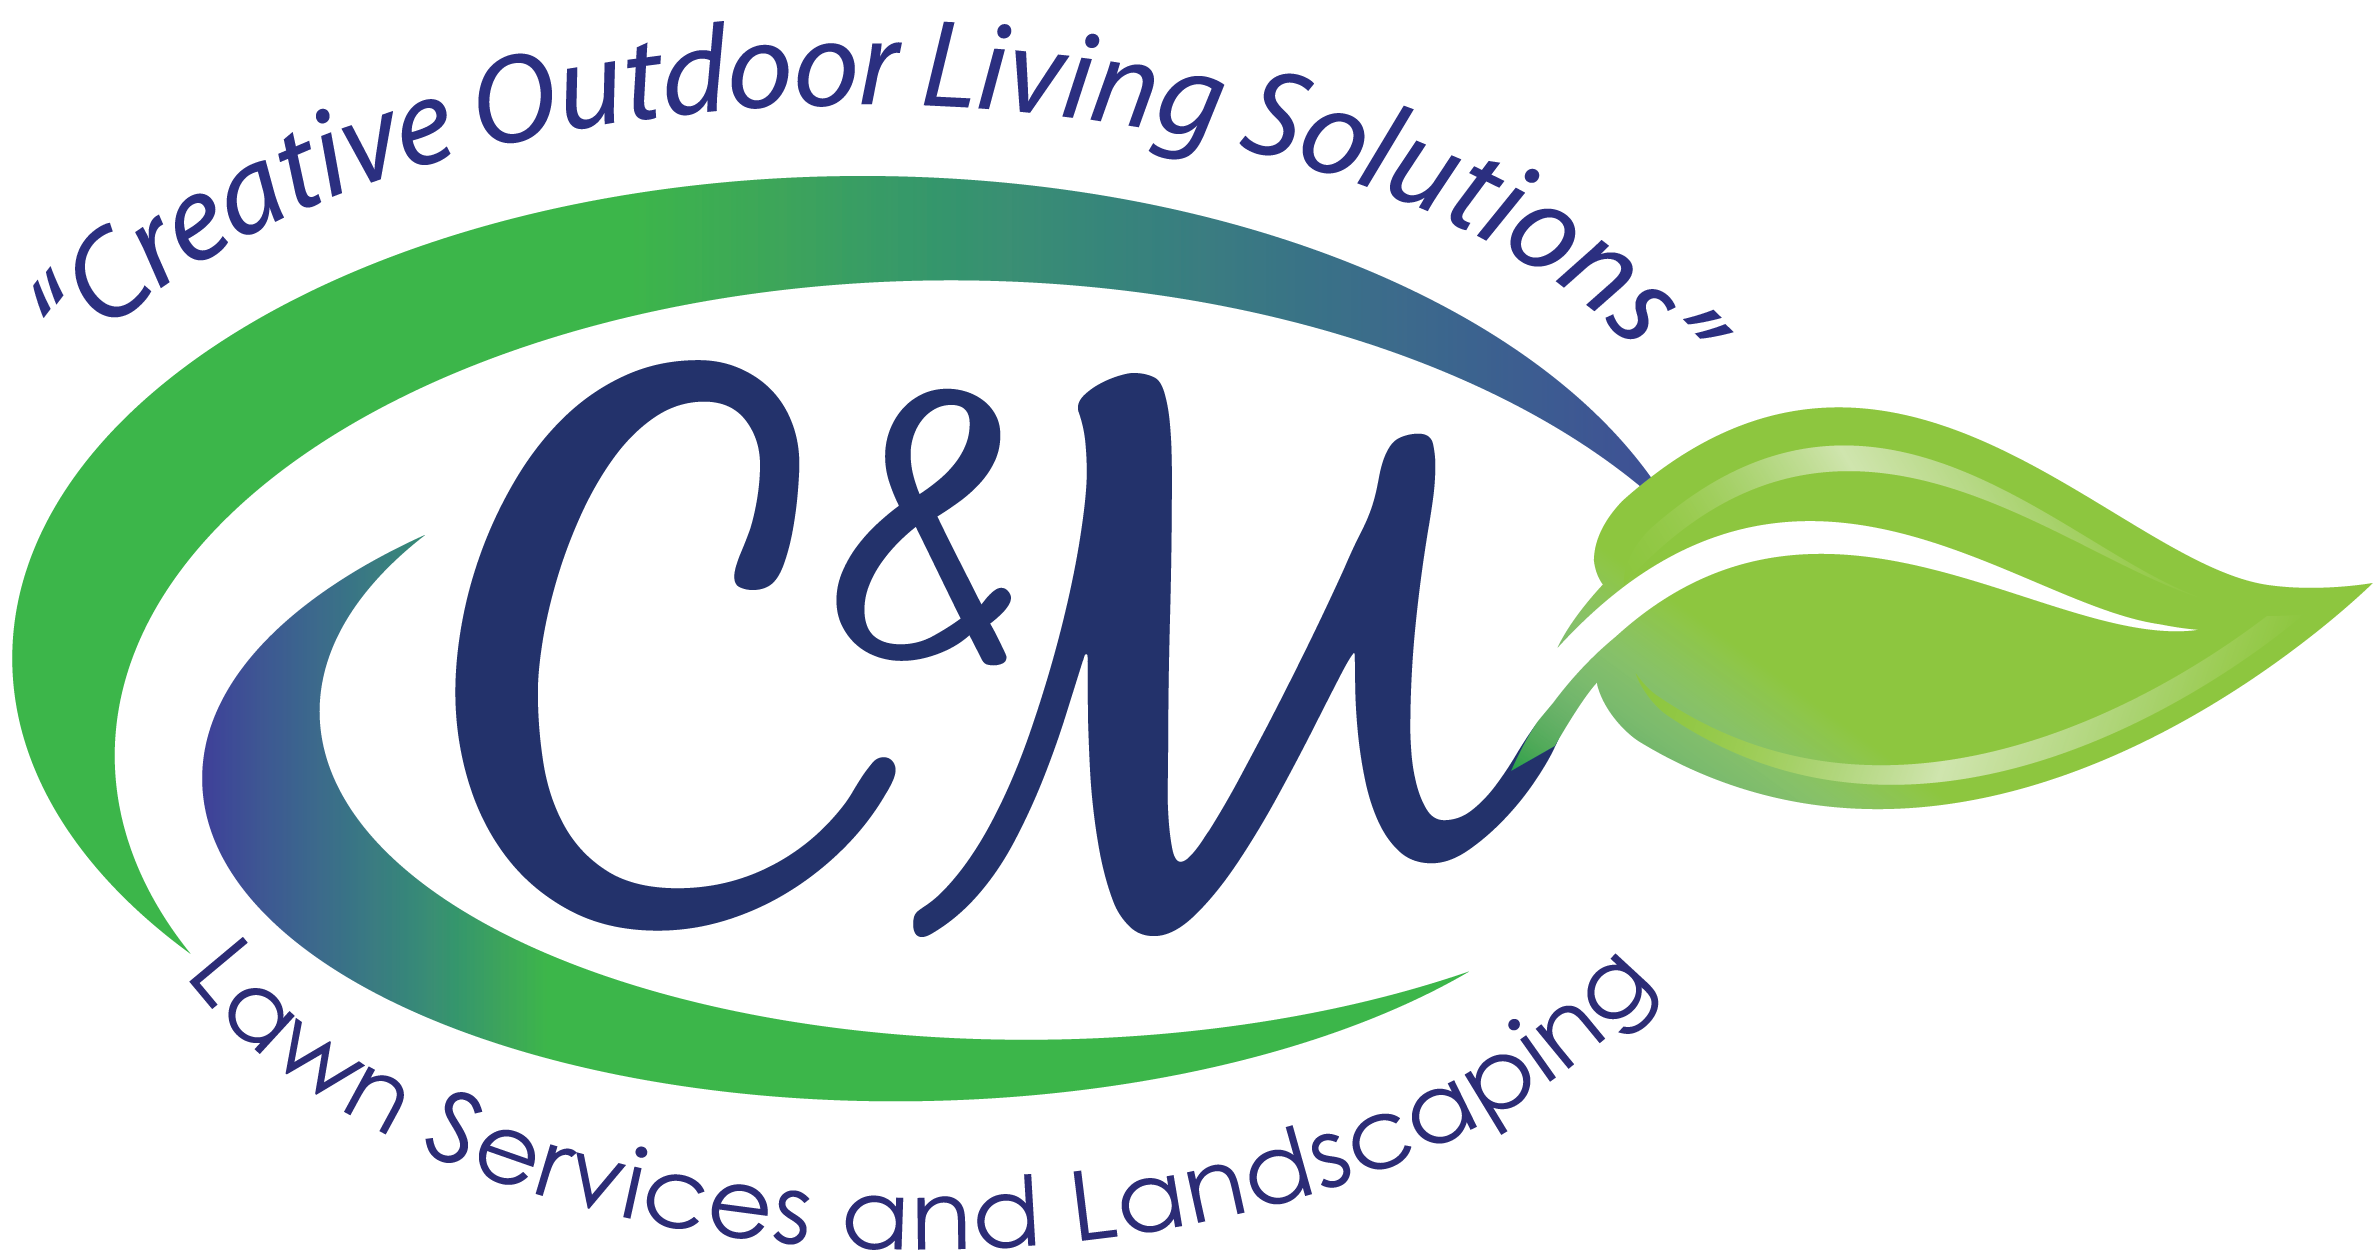 C and M Lawn Service and Landscaping